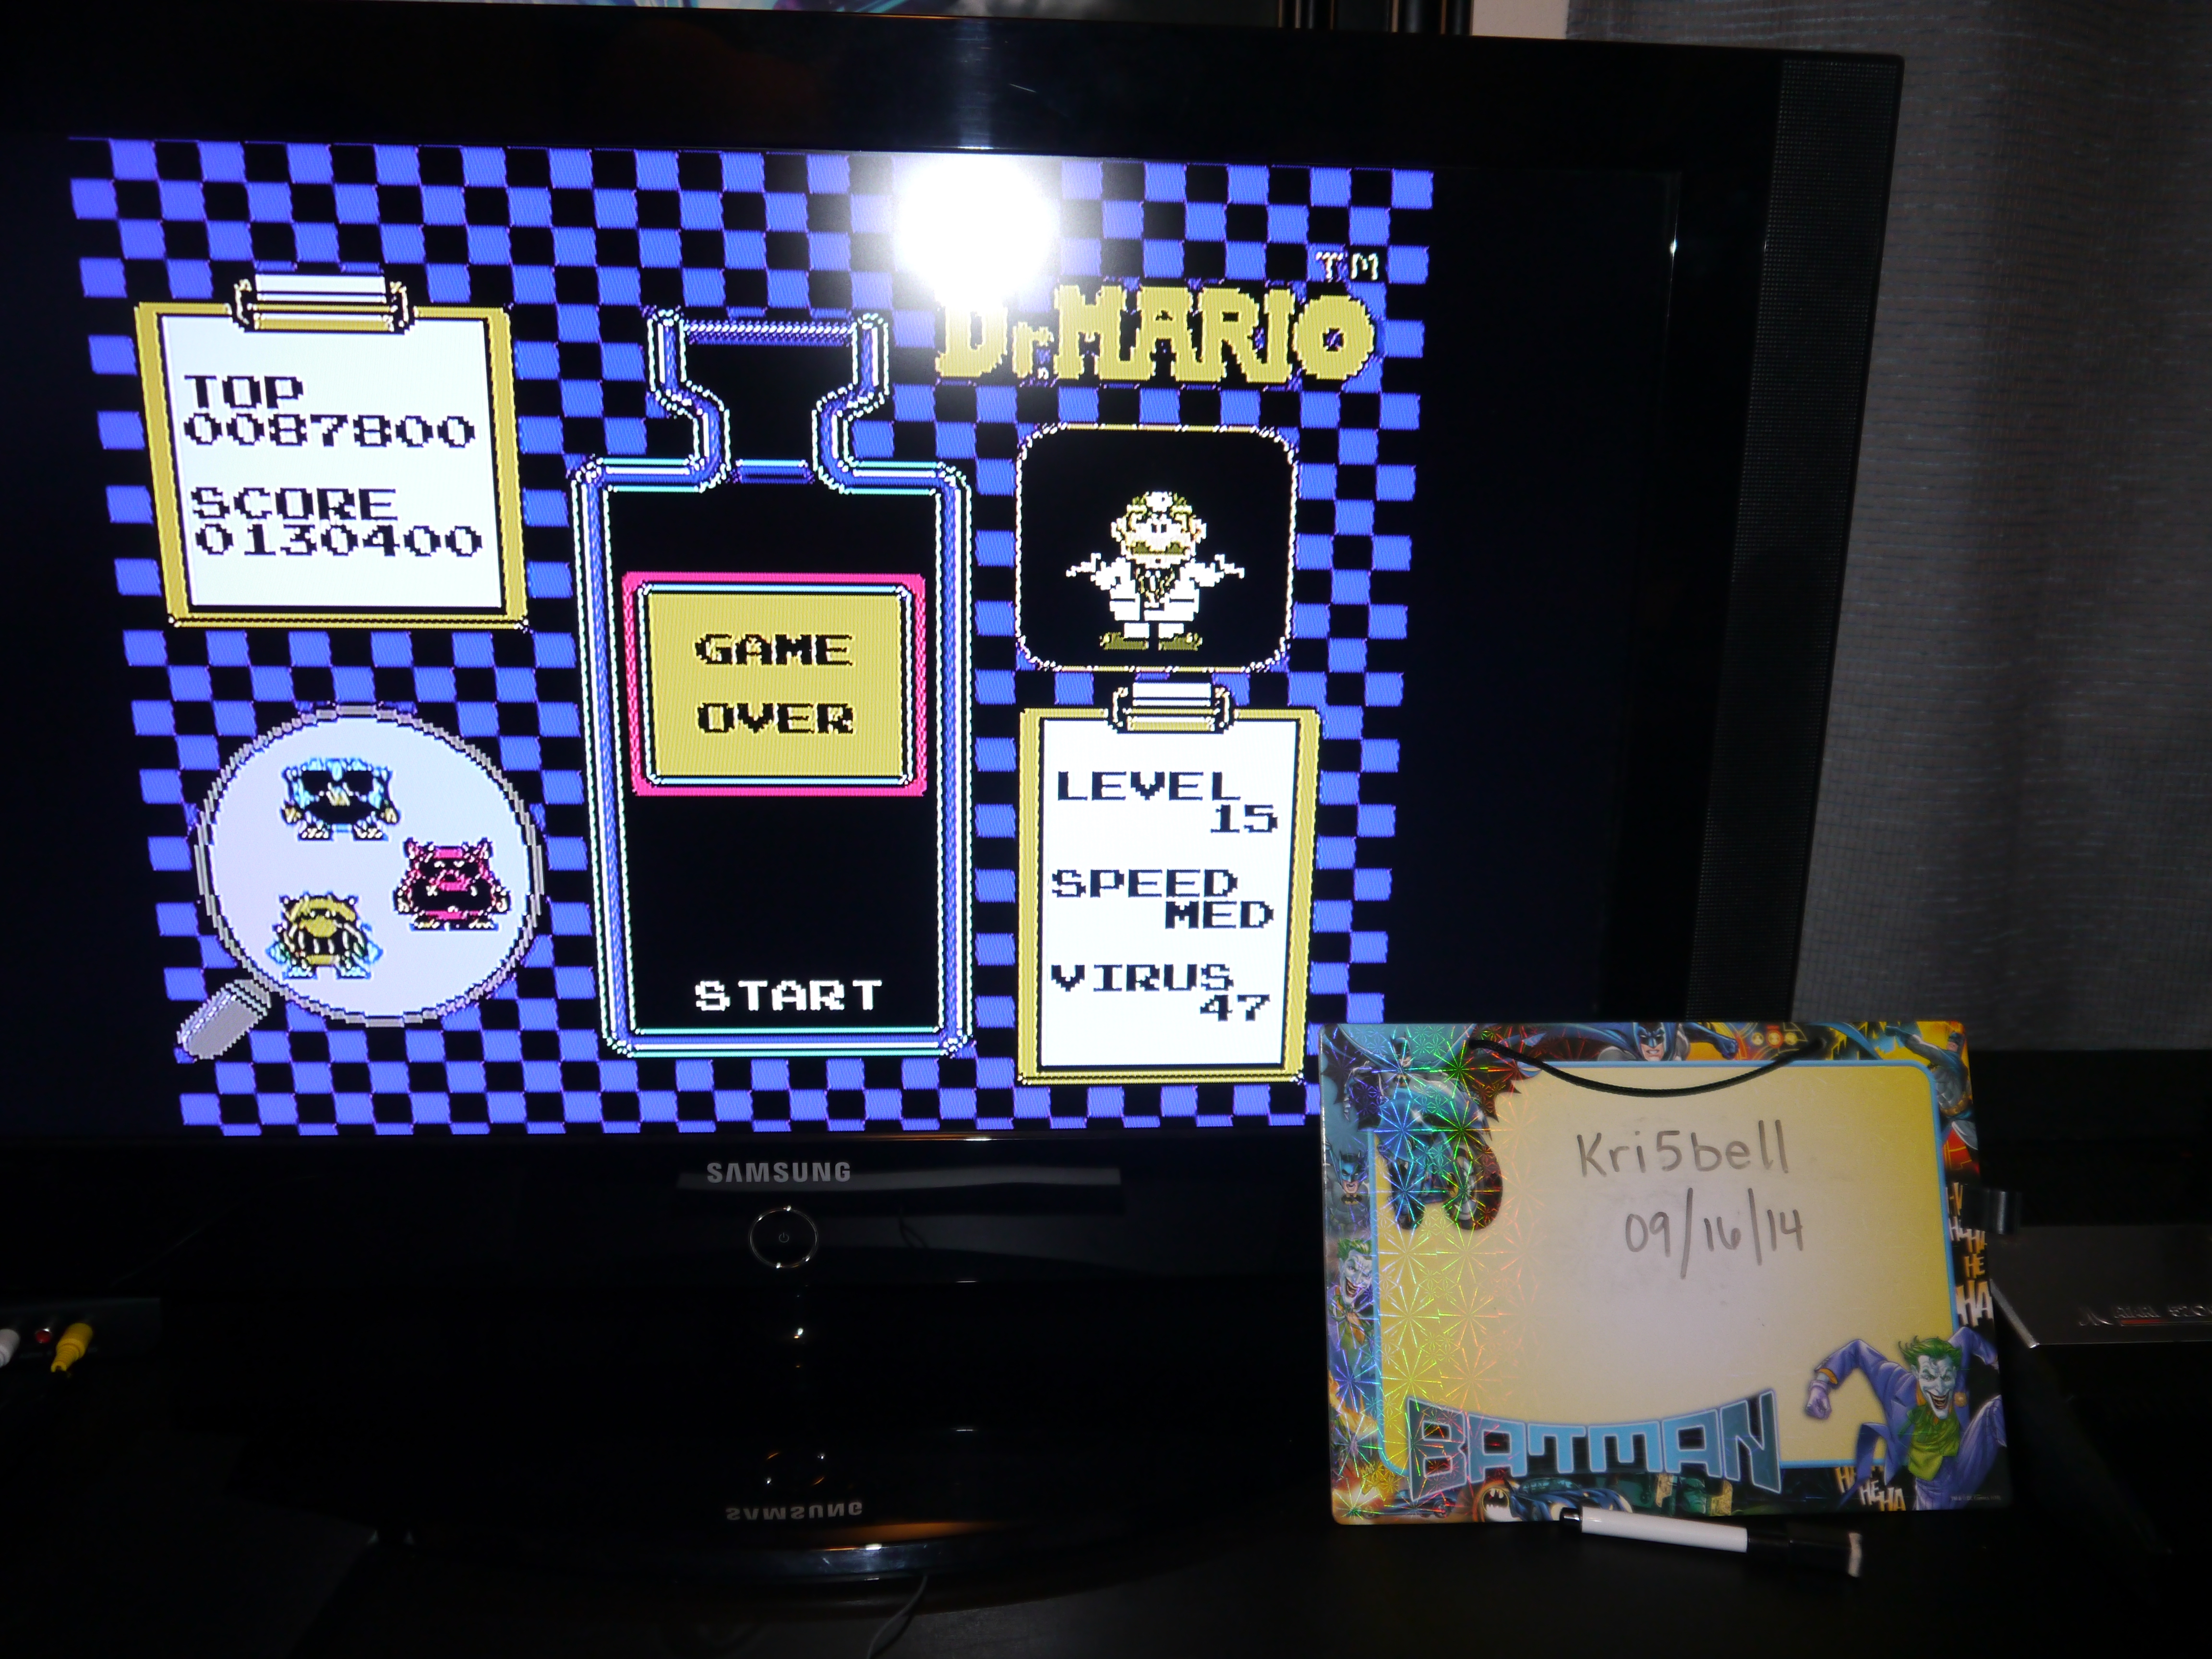 Dr. Mario 130,400 points